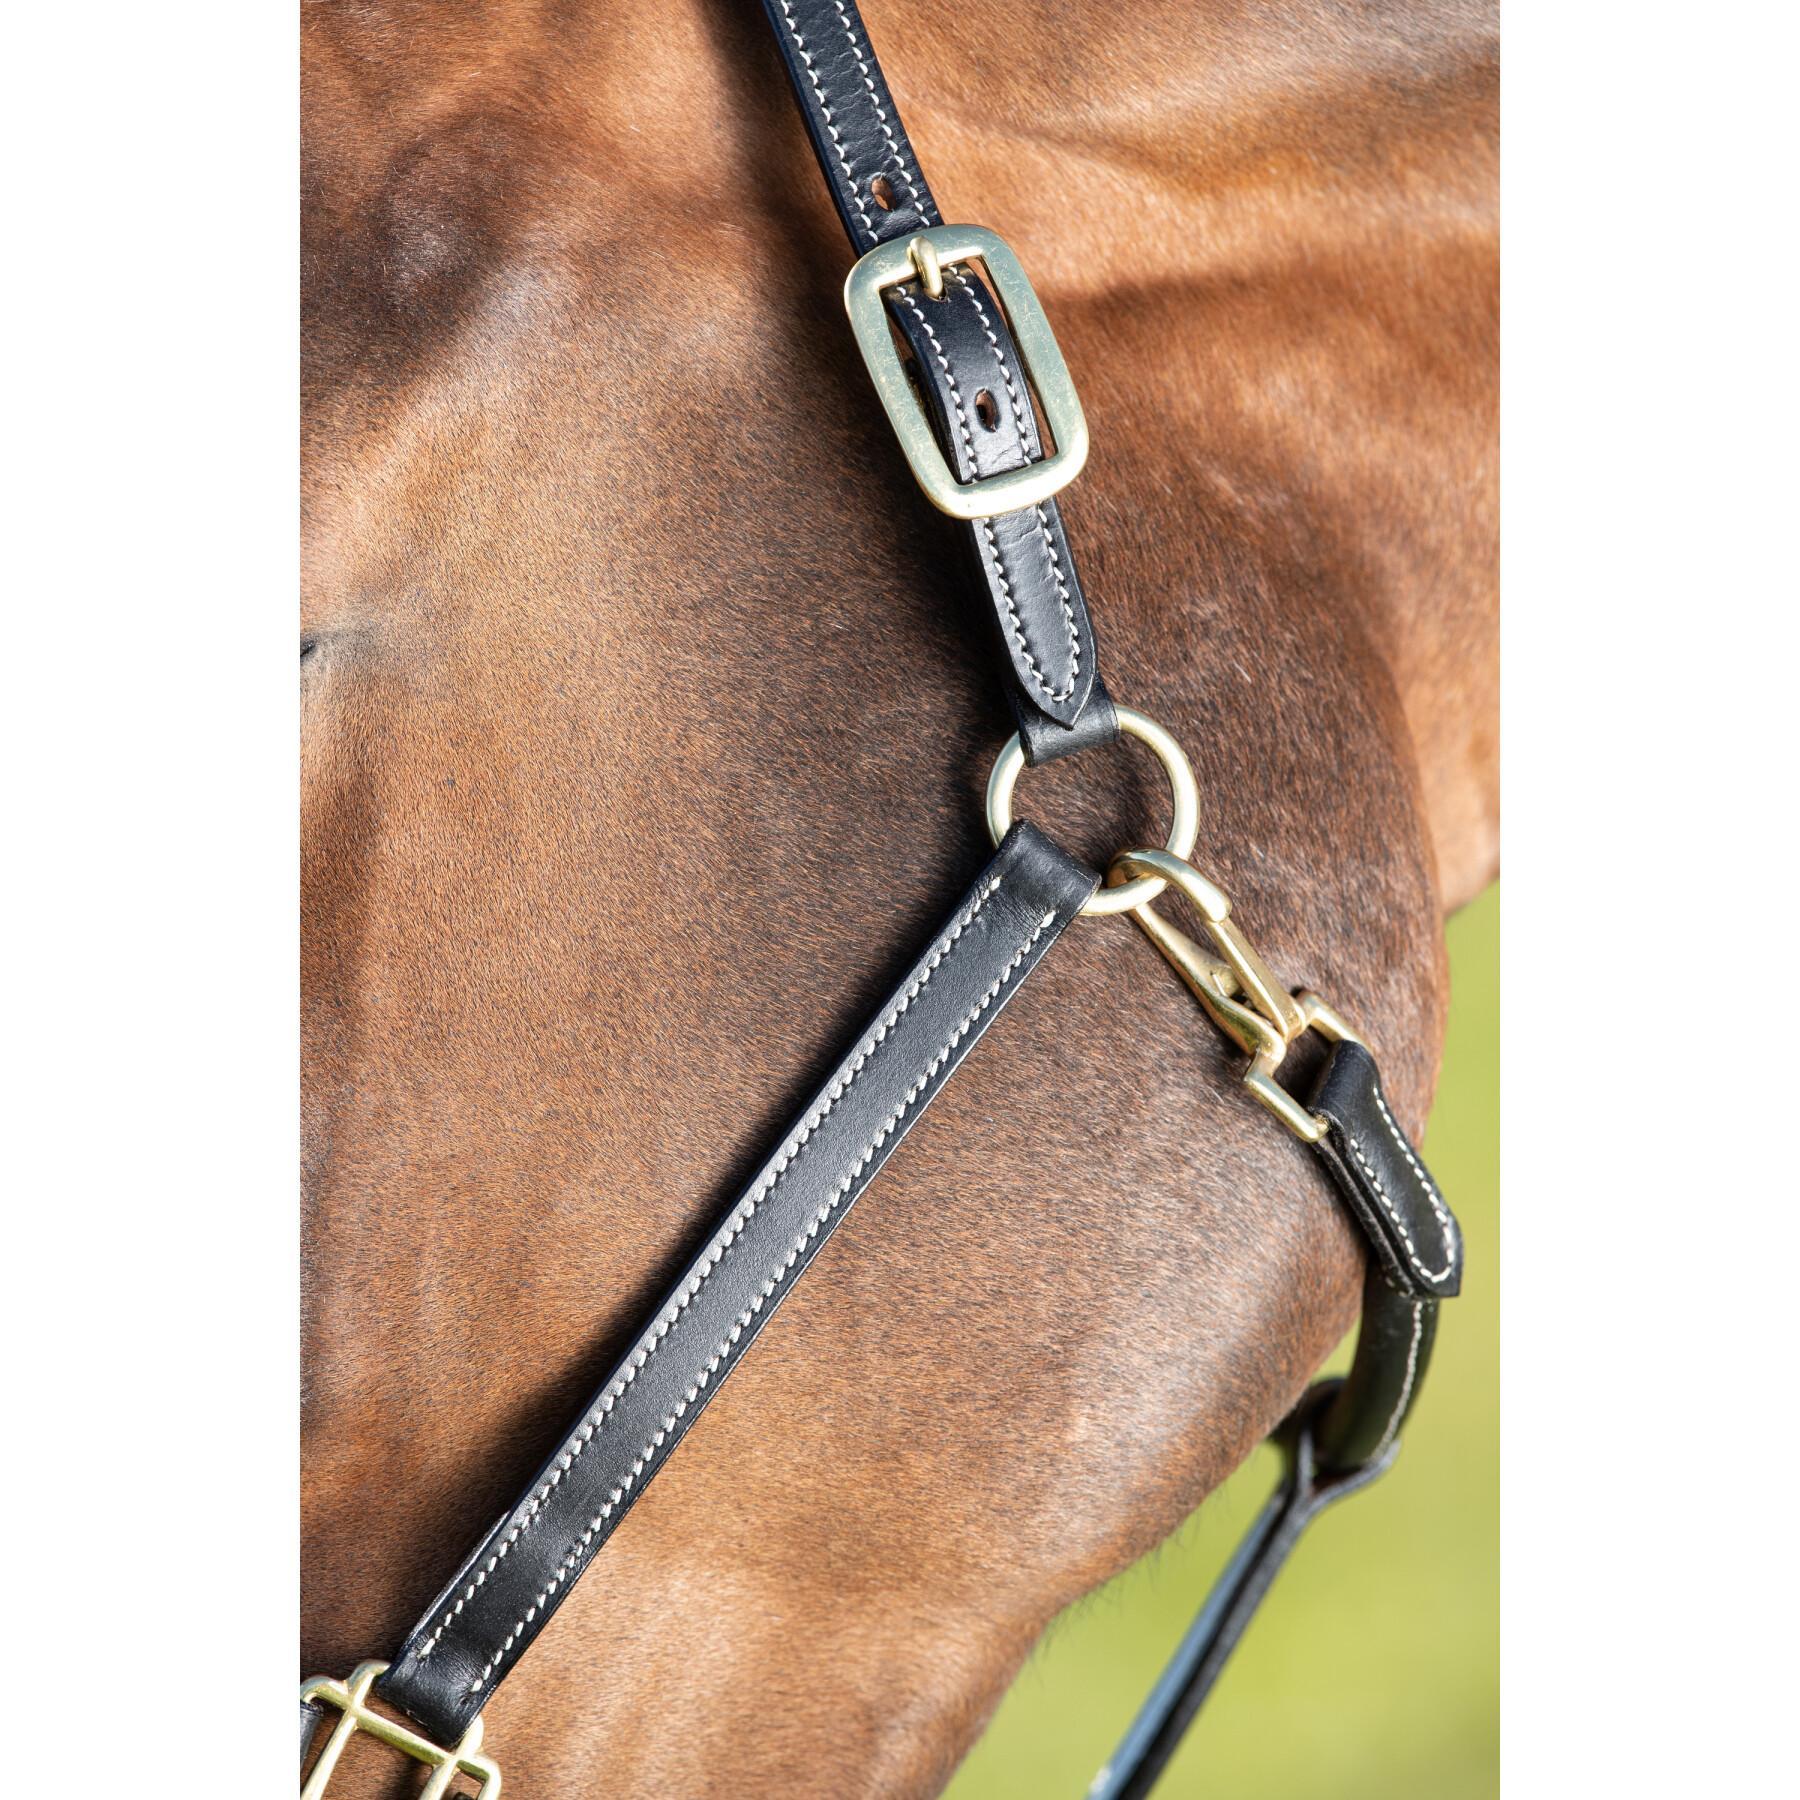 Leather halter for horse HFI